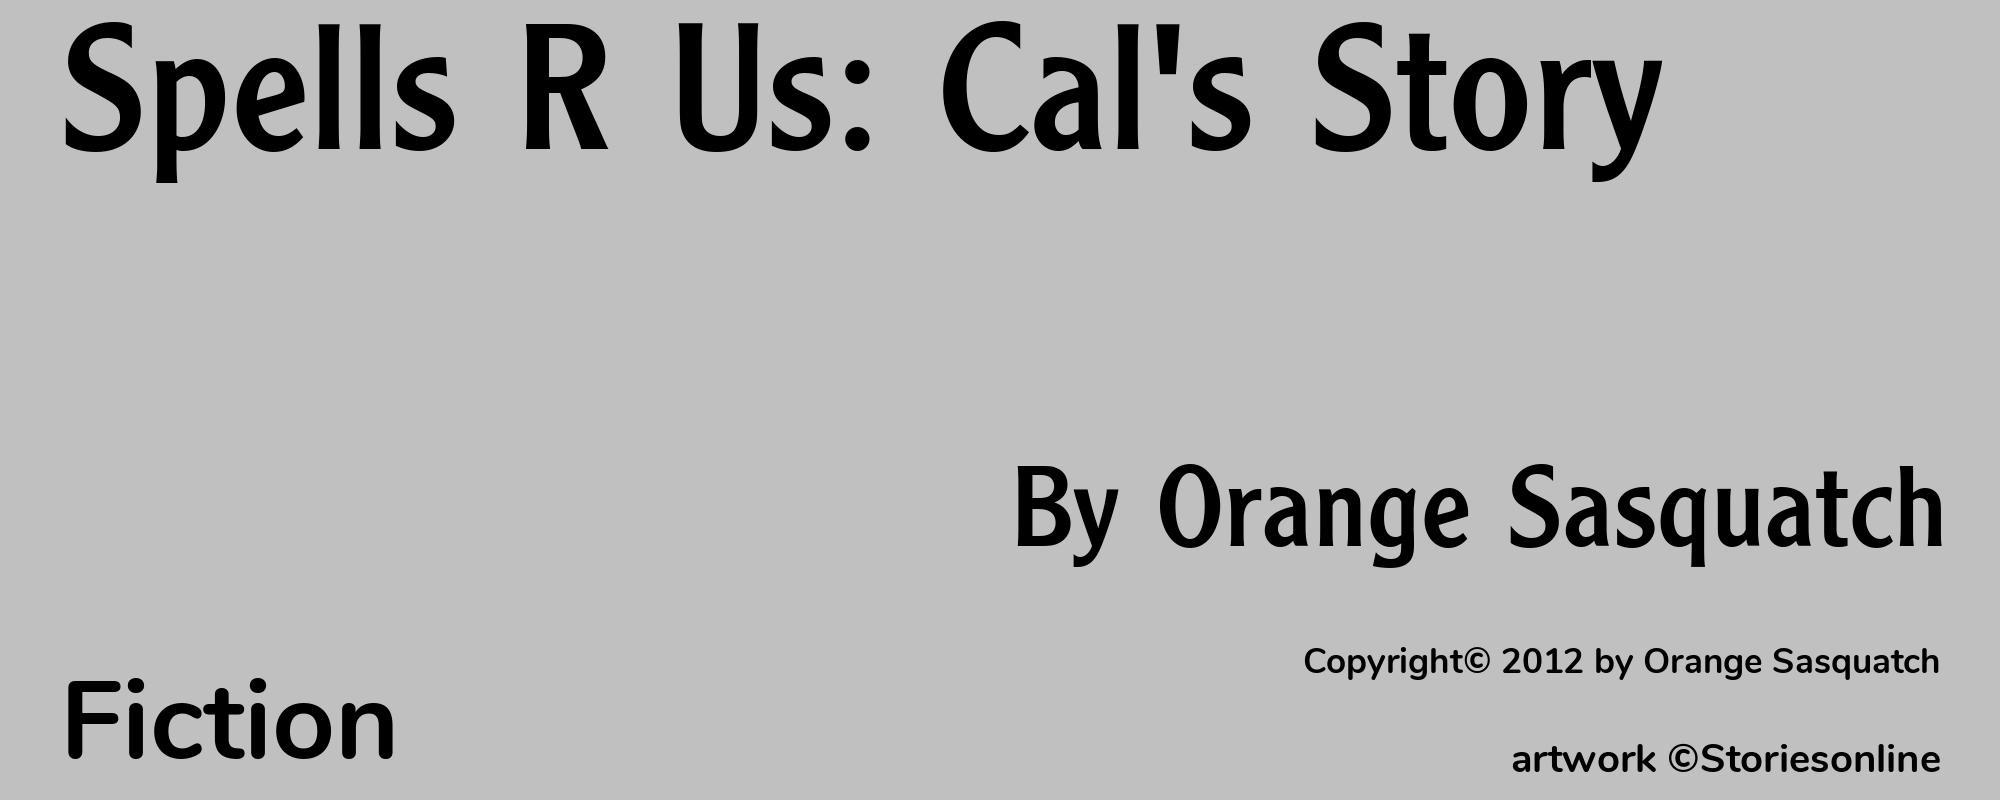 Spells R Us: Cal's Story - Cover